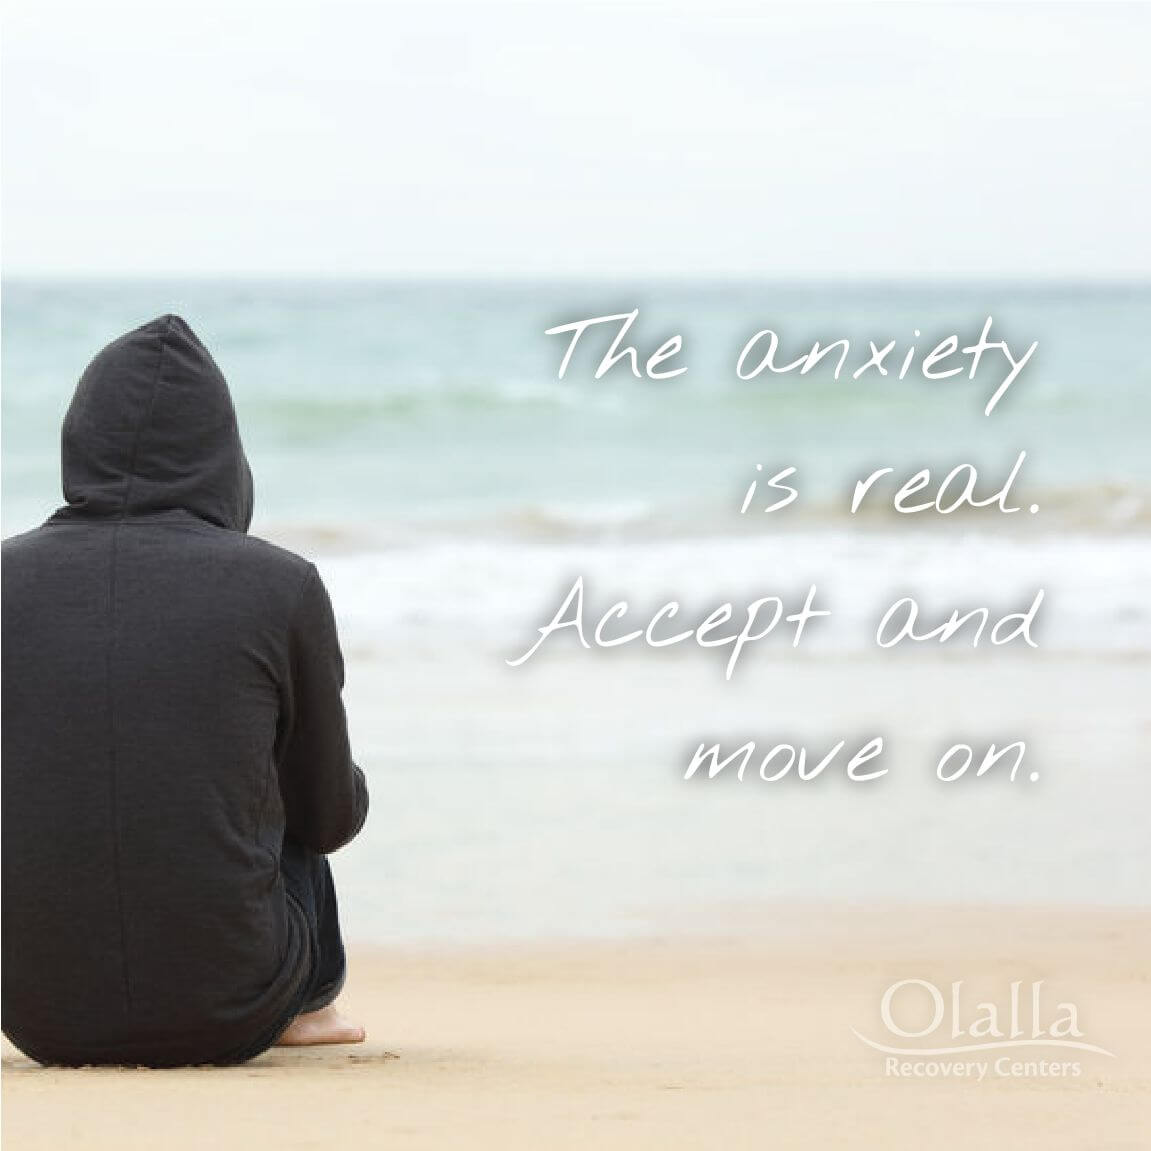 The anxiety is real. Accept and move on.